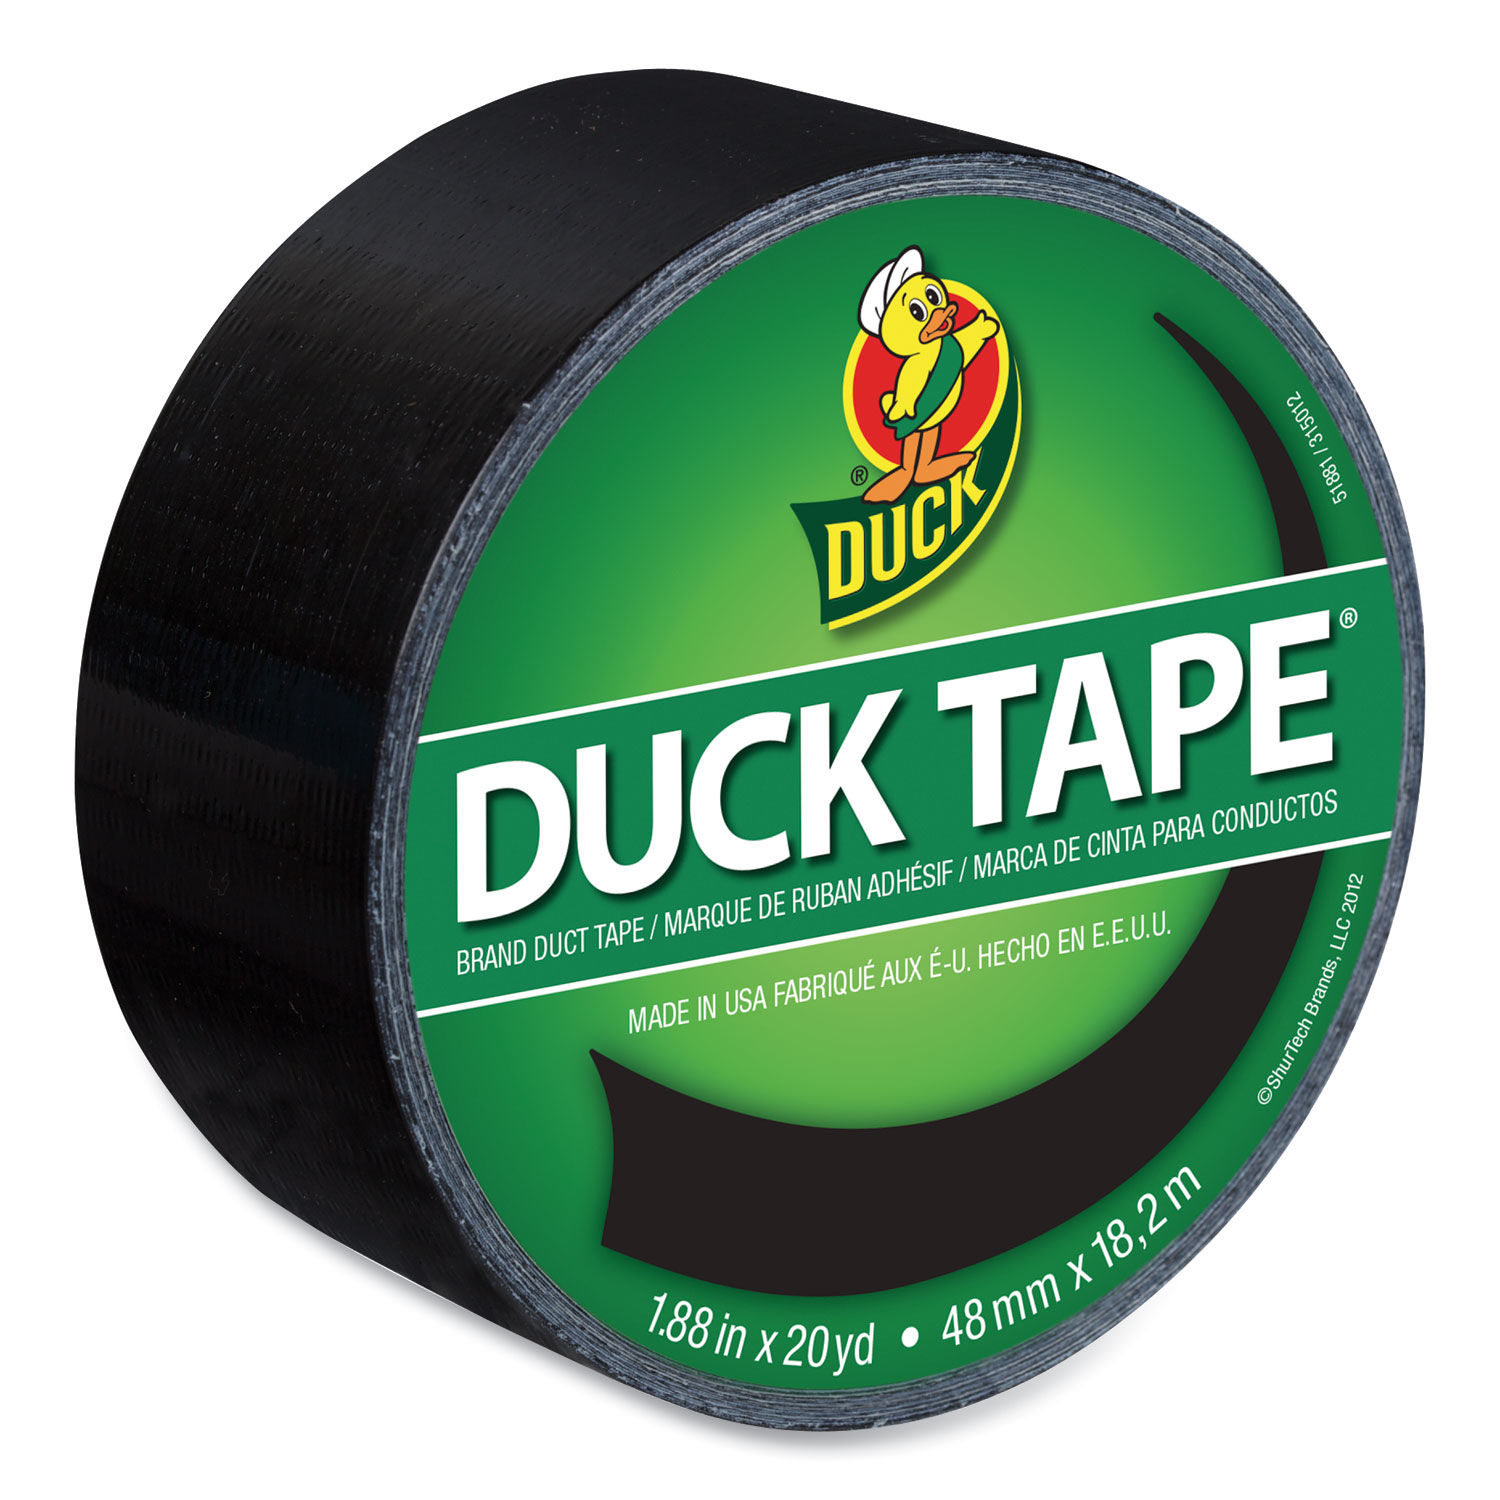 Colored Duct Tape 3" Core, 1.88" x 20 yds, Black